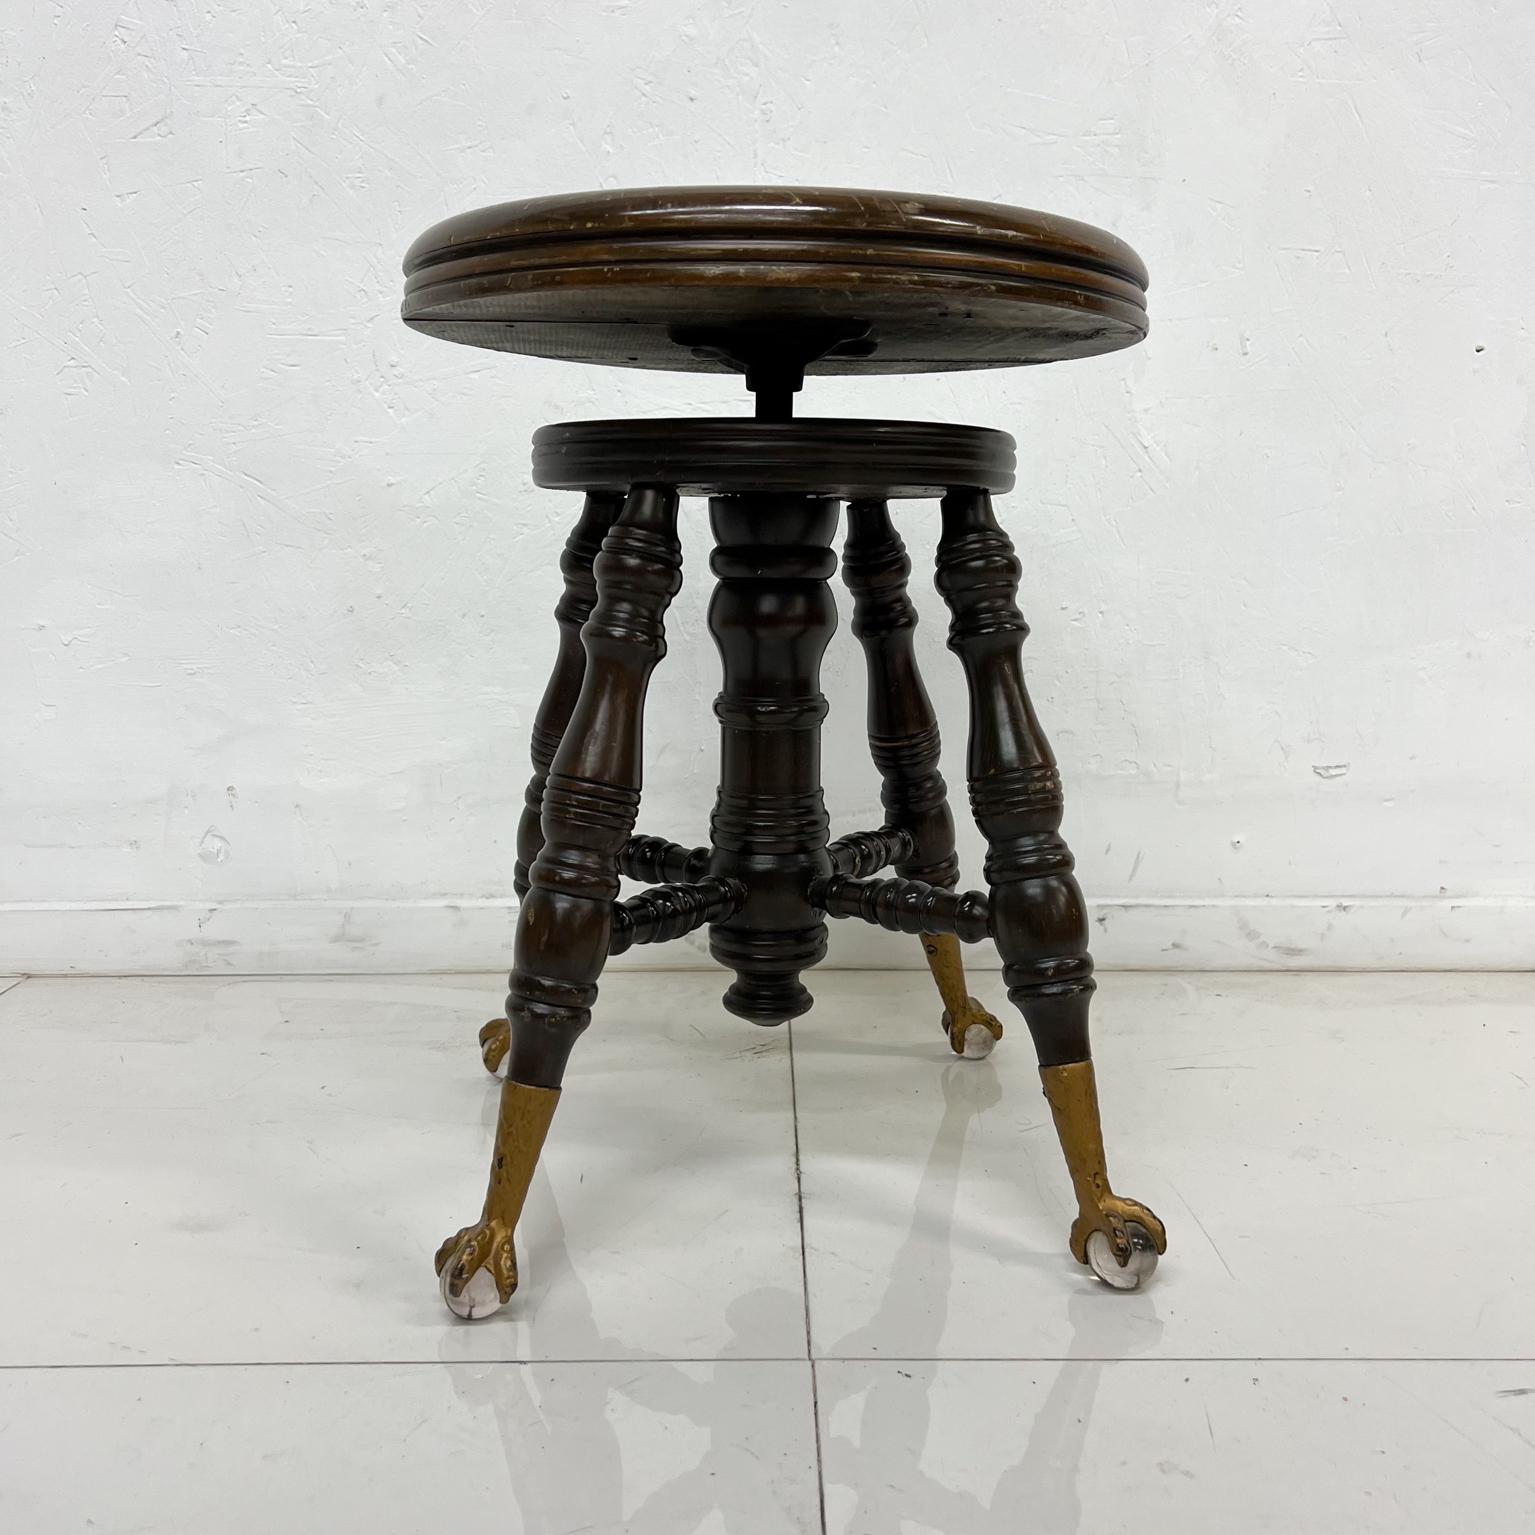 1900s antique Victorian piano stool Charles Parker 
Solid wood and brass glass eagle talon claw feet
Measures: 14.5 diameter x 19 tall 
Seat height is adjustable.
No label
Attributed to Charles Parker Co USA.
Delightful preowned antique